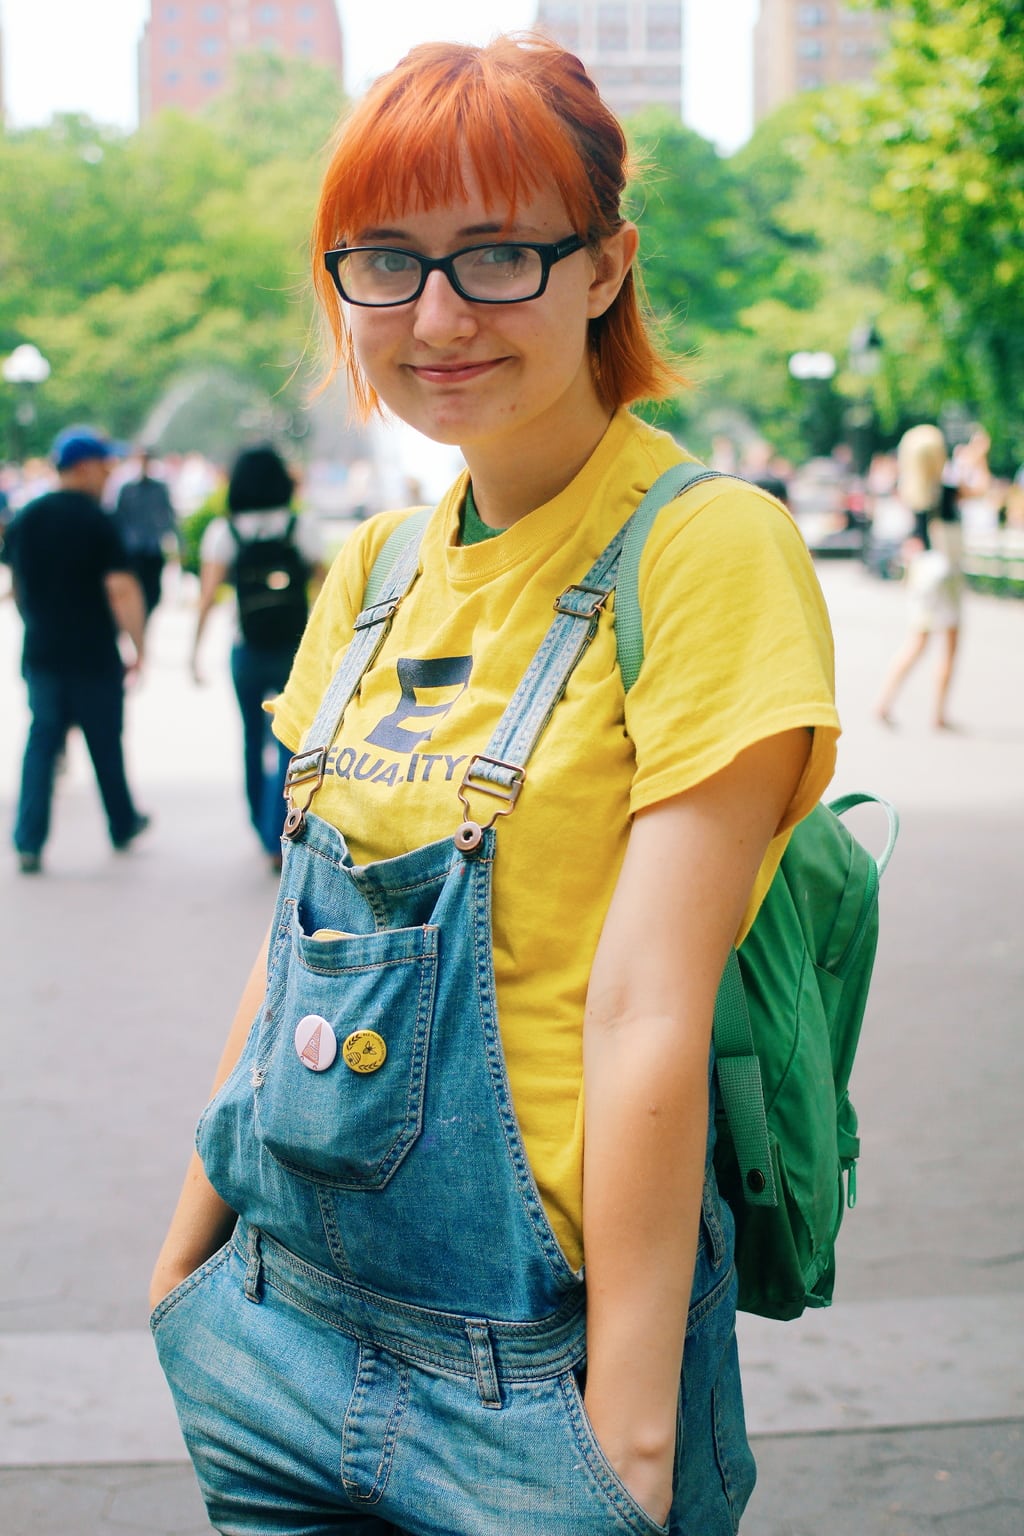 Fashion at School of Visual Arts, NYC - student Kaylee rocks bright red hair, a yellow Equality tee shirt, a green backpack, and overall shorts